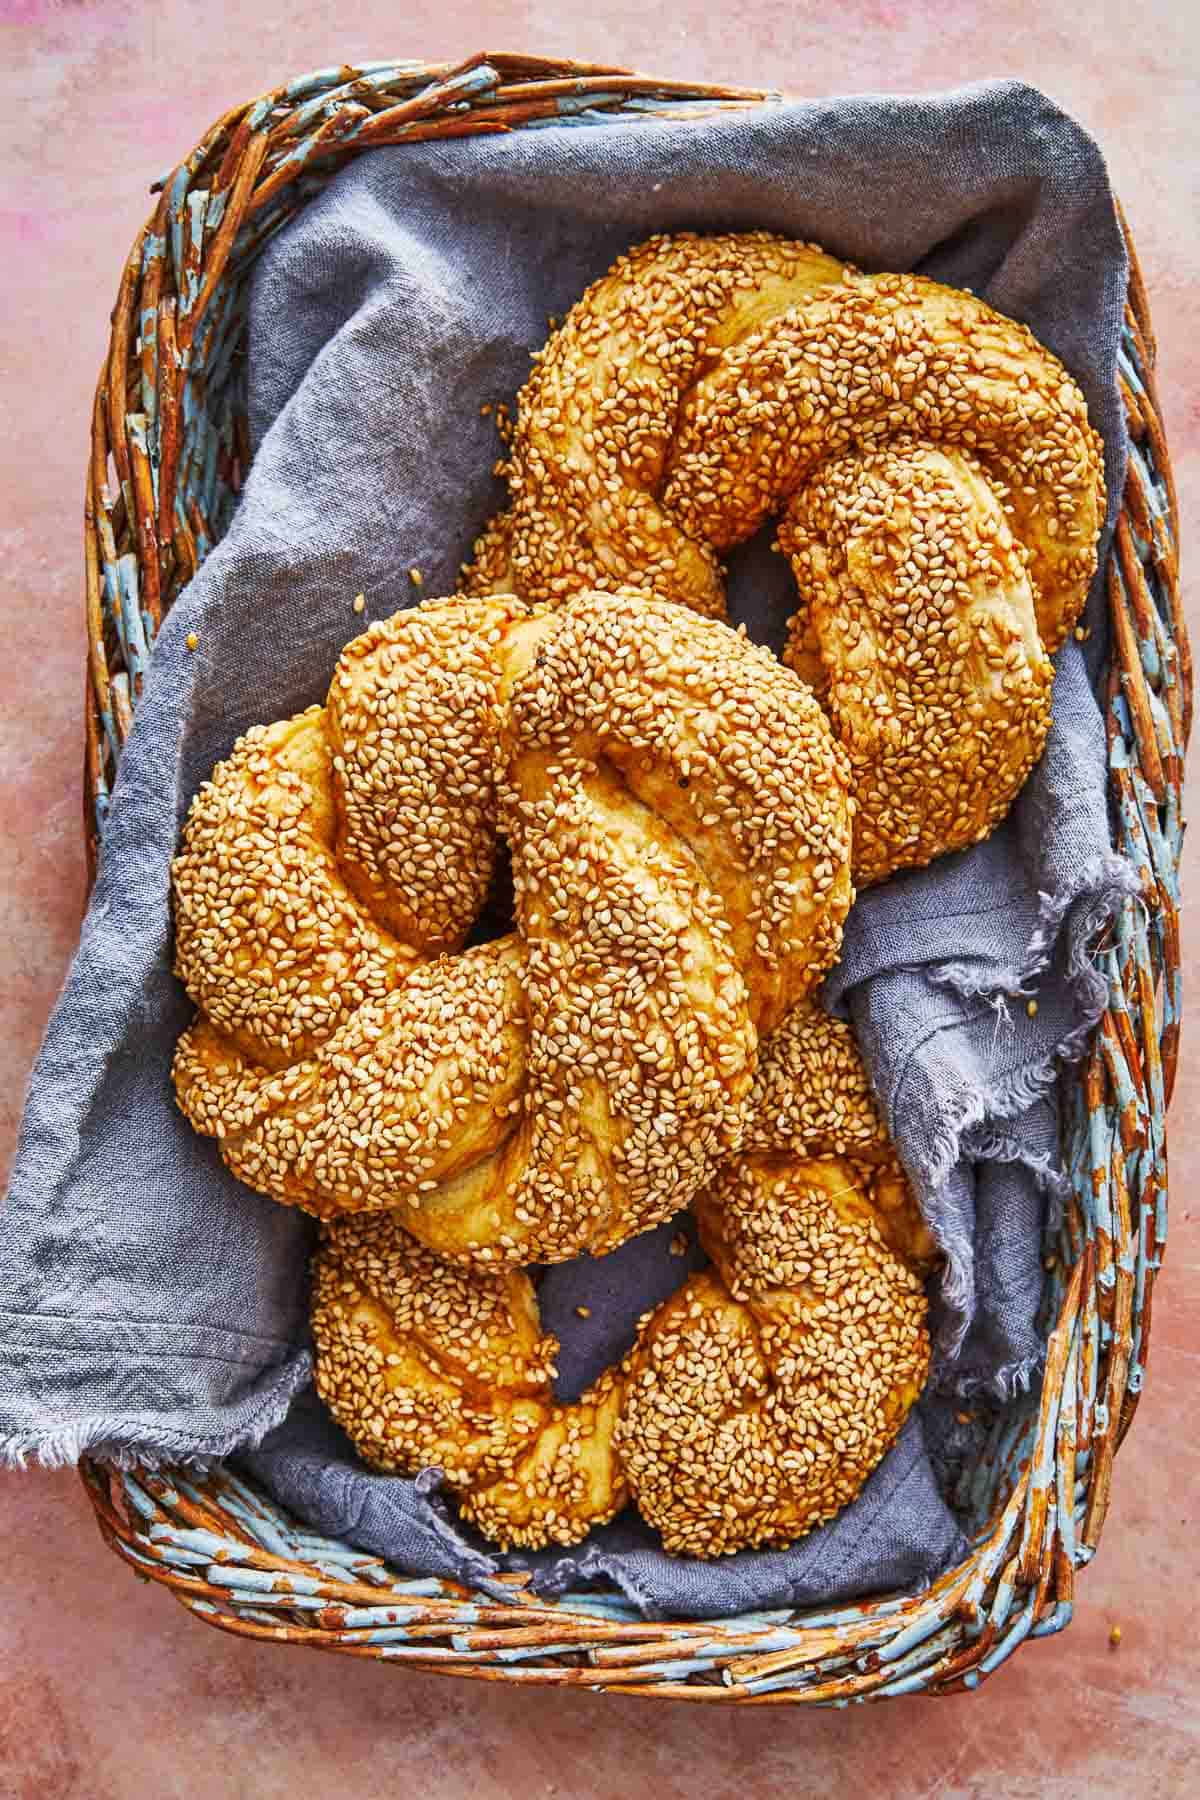 three baked simit dough rings in a basket.